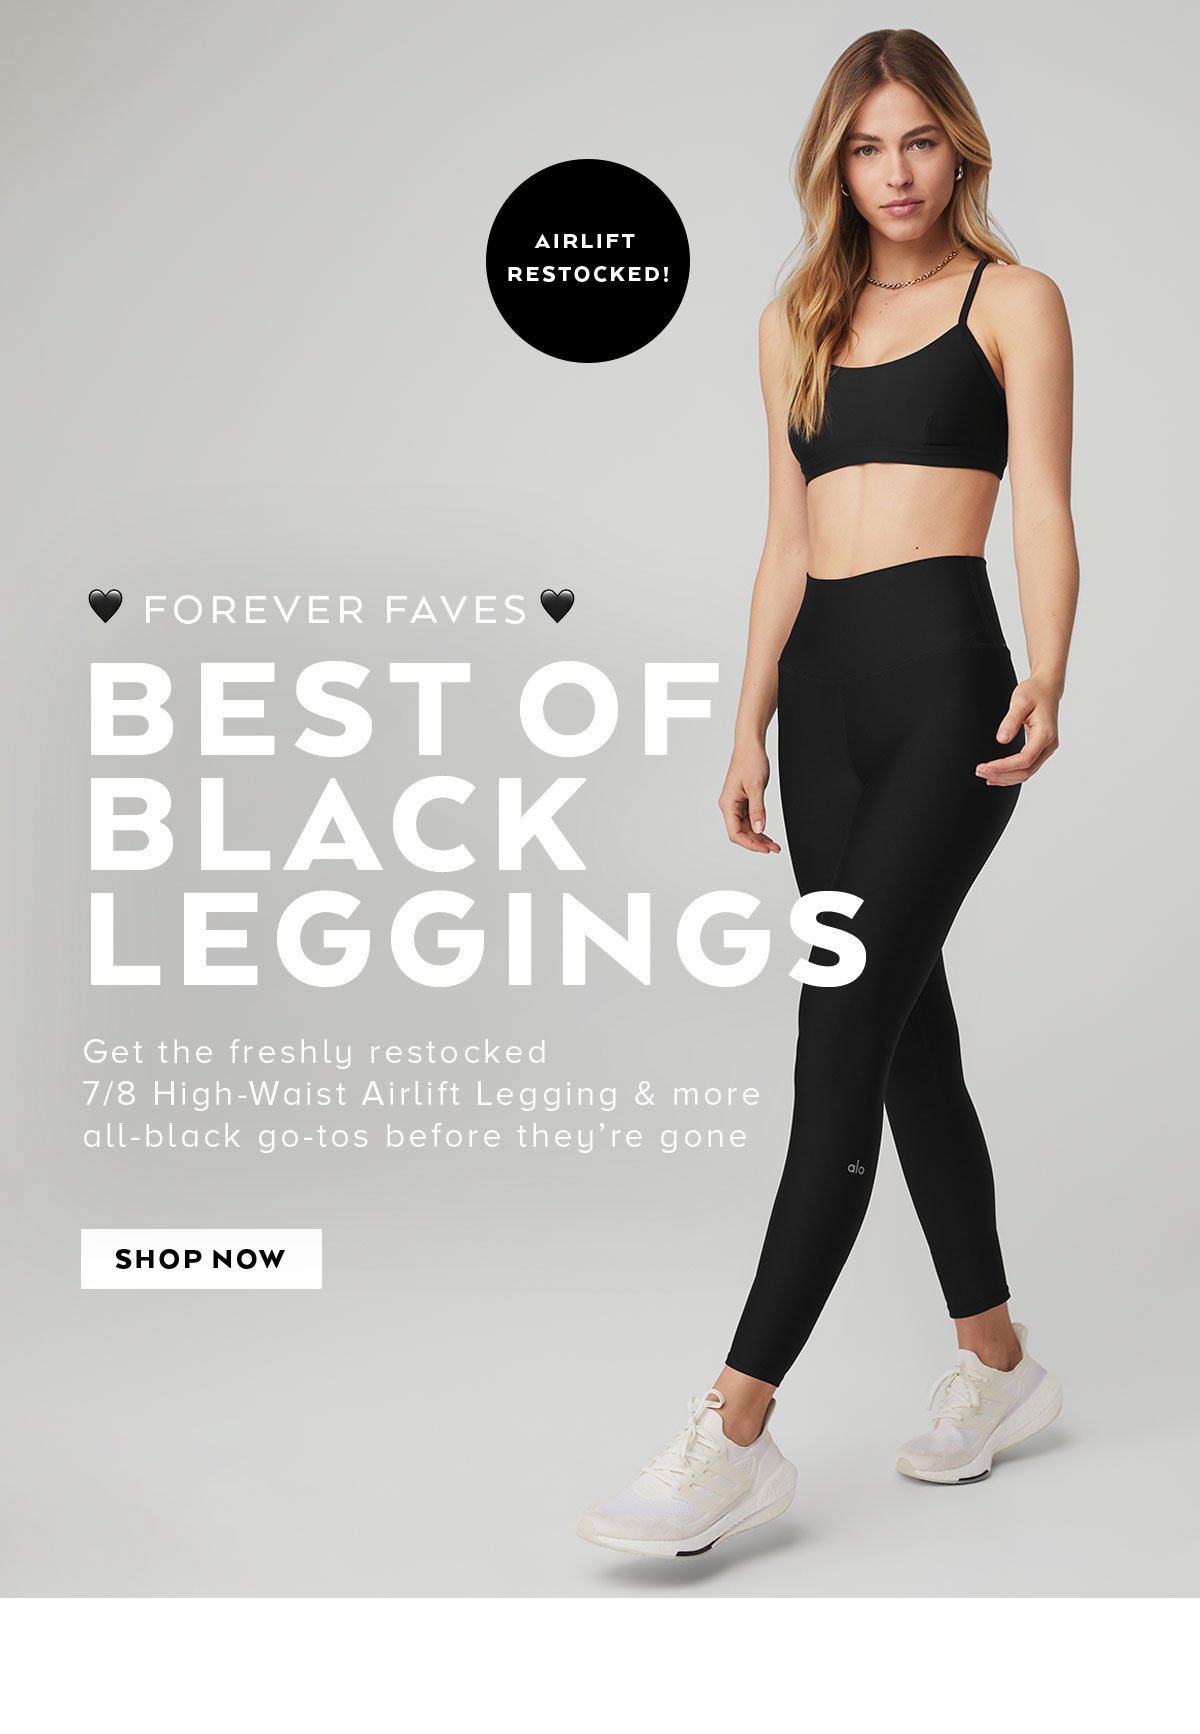 Alo Yoga: DID YOU MISS THESE BLACK LEGGINGS?